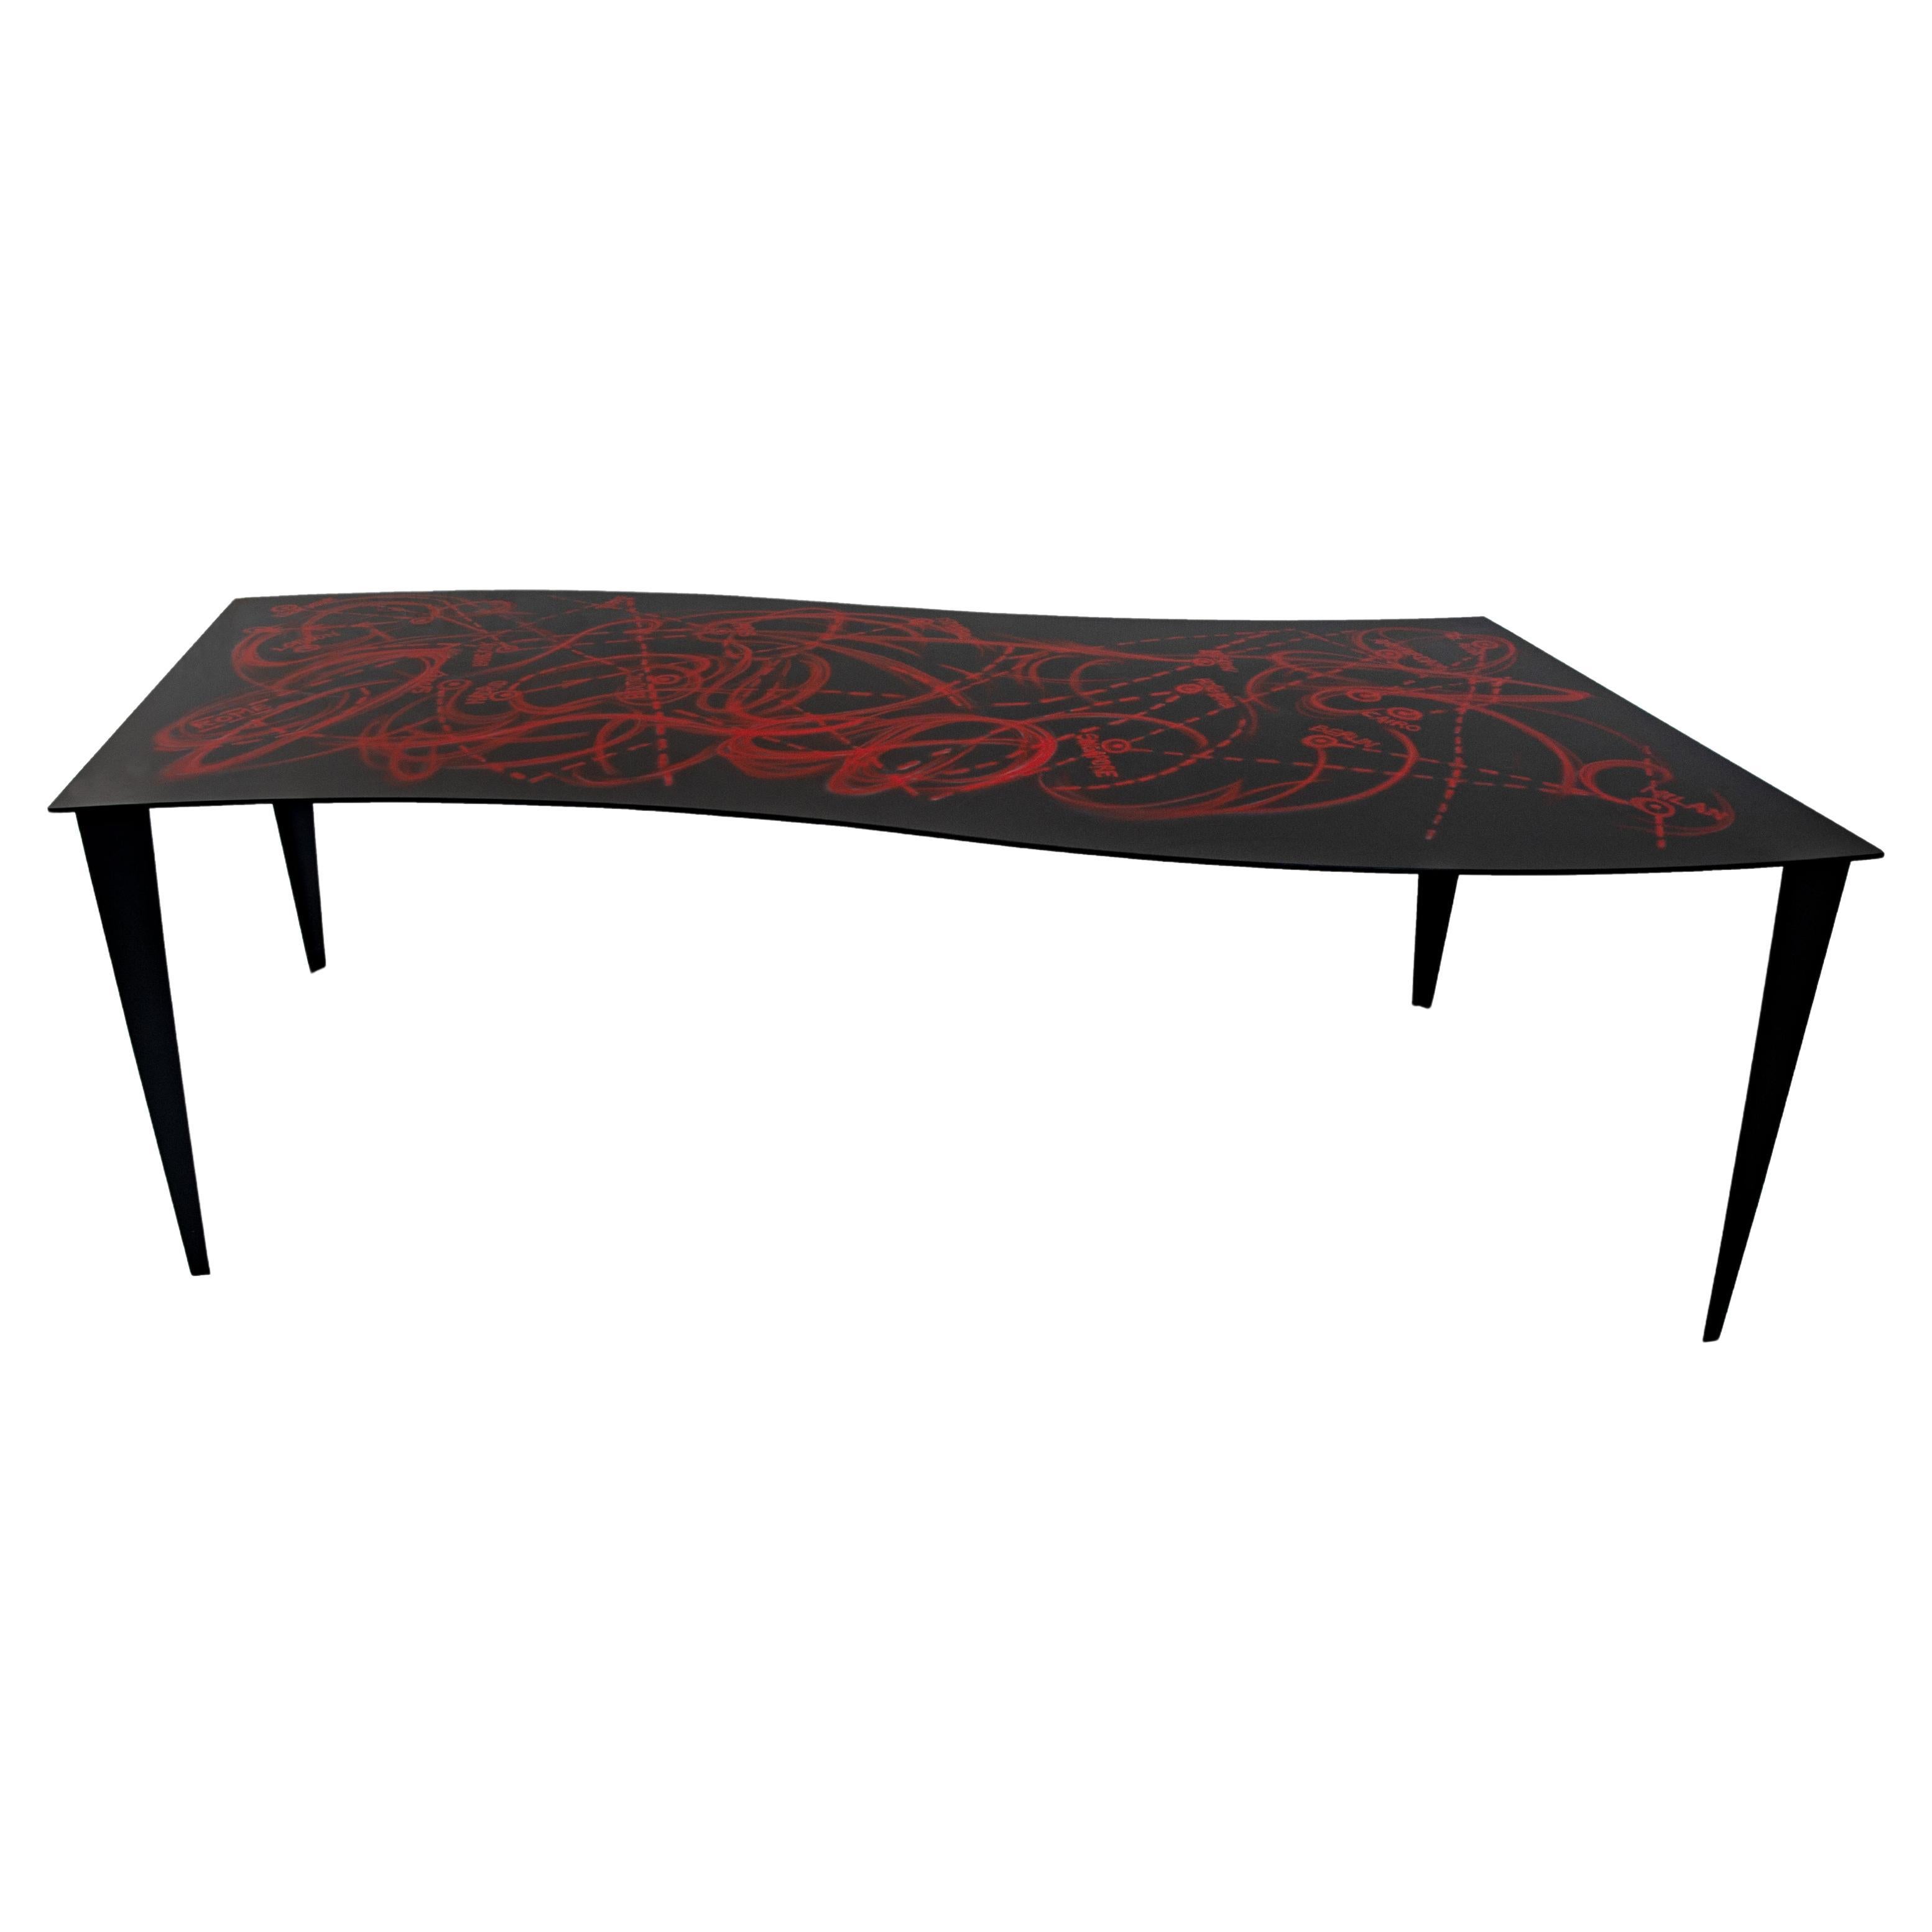 Contemporary Art Dining Table - Senza Titolo by Sandro Chia For Sale